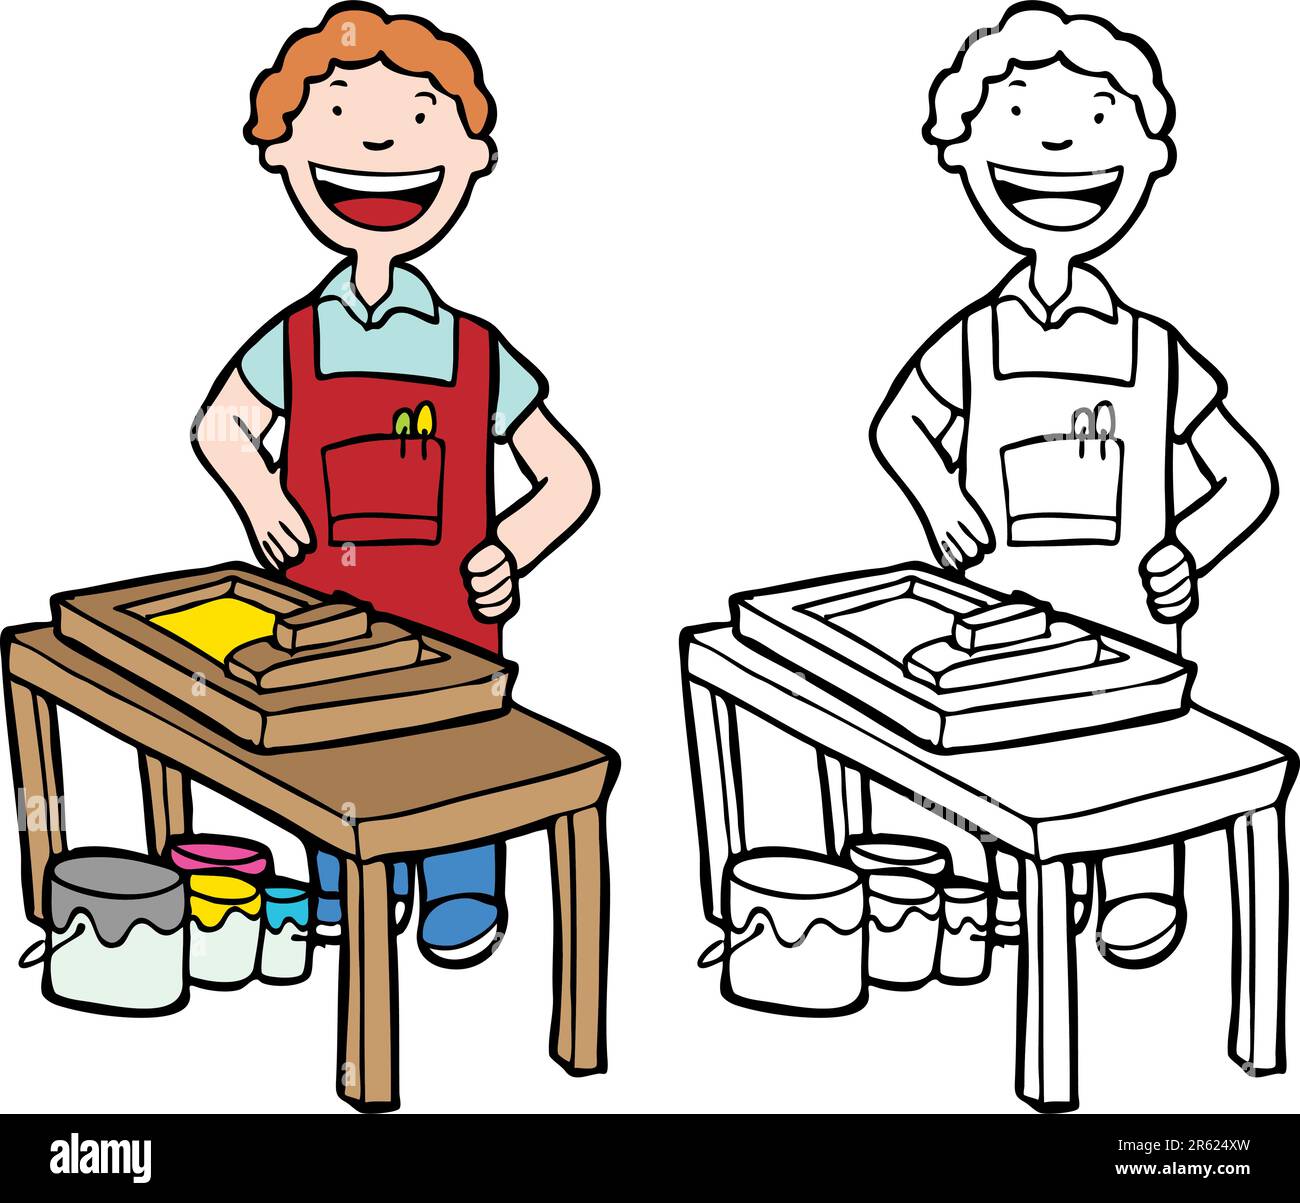 Cartoon image of a printer professional - color and black/white versions. Stock Vector